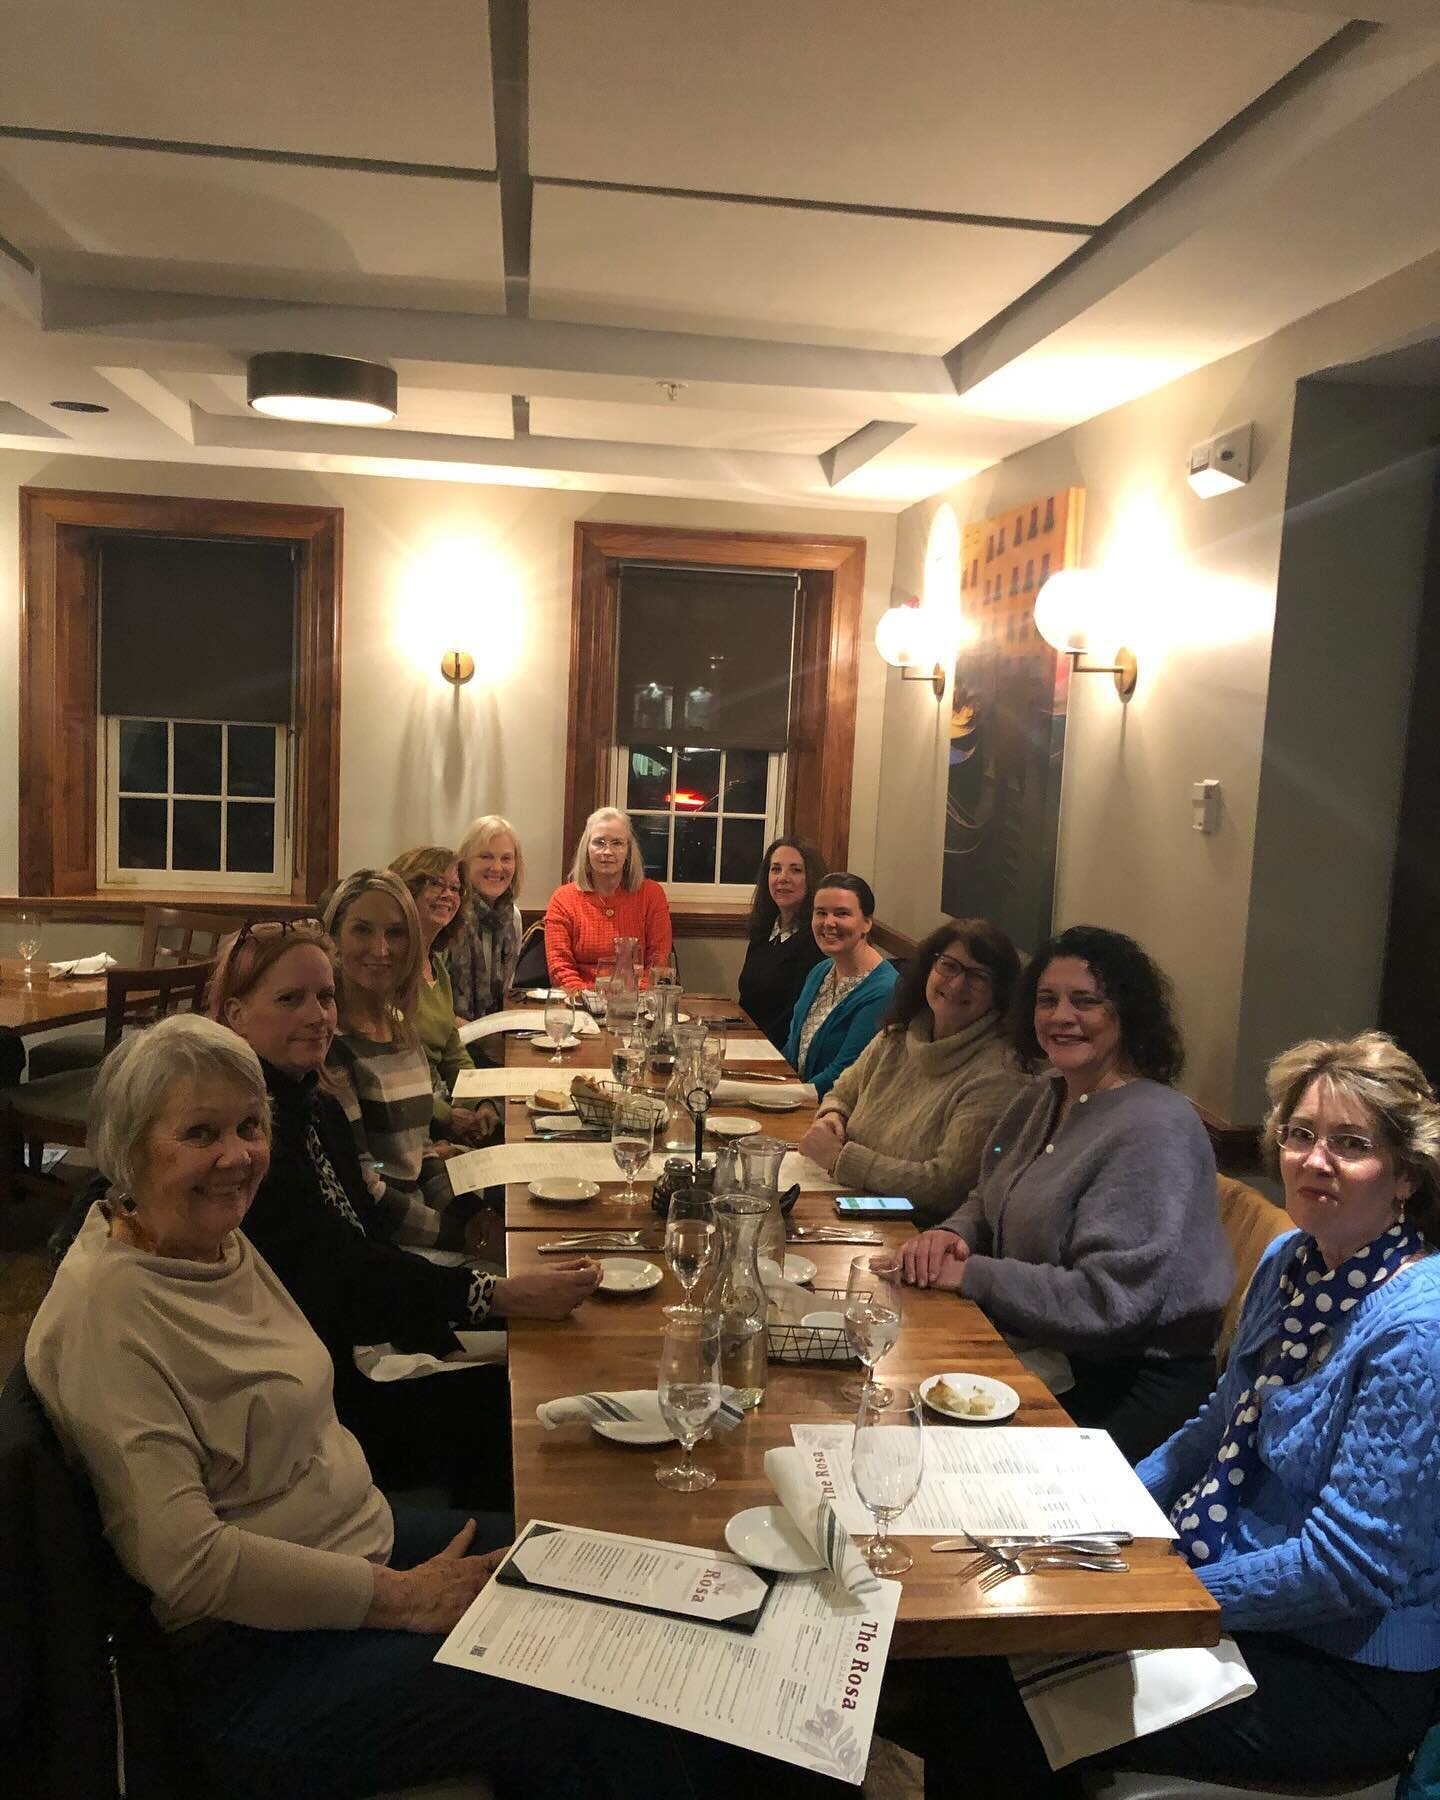 Cheers to some fun at the Rosa! 🍕🍝🍷 #portsmouthnh #therosaportsmouth #gfwc #gfwcnh